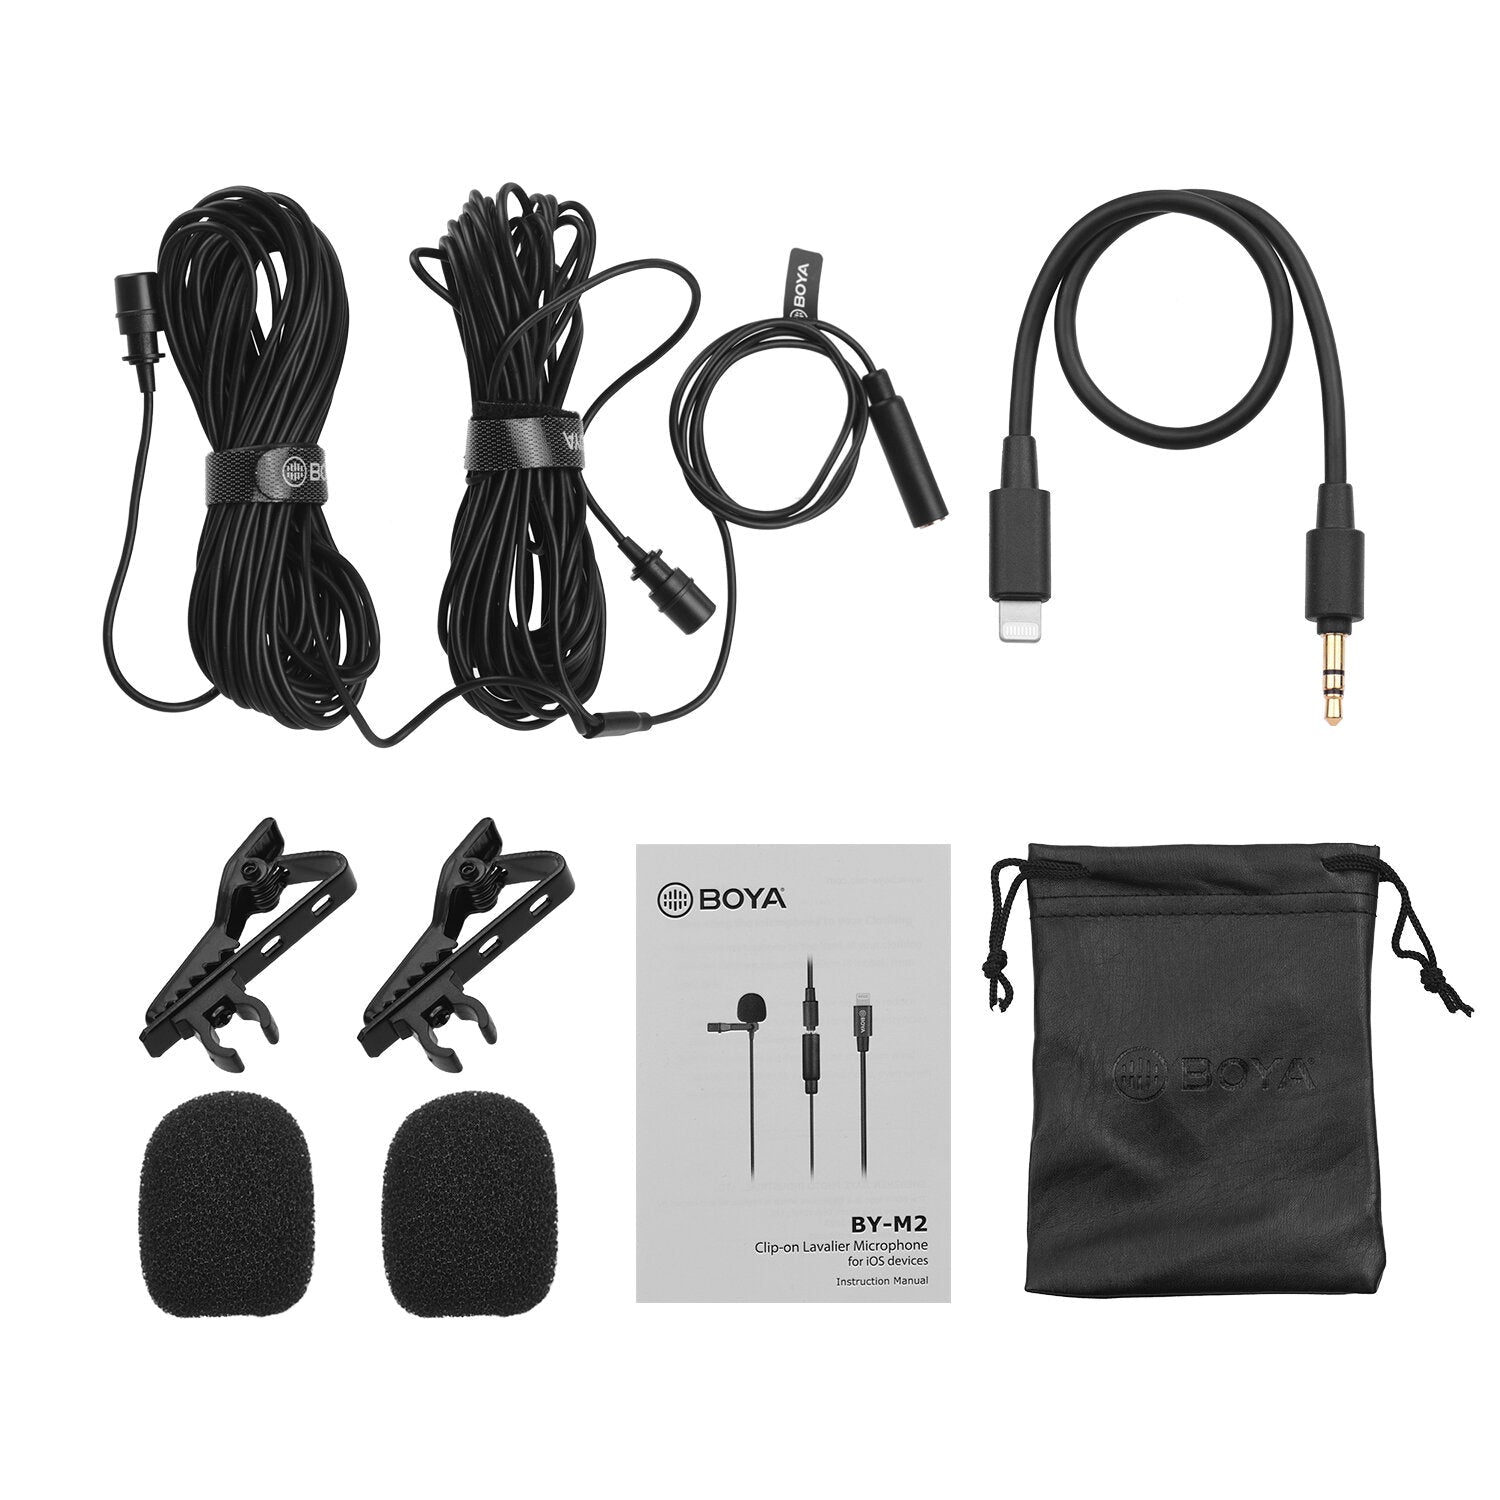 Dual Lavalier Microphone Omnidirectional Digital MFI Video Mic for iPhone 11 Pro Xs Max Xr iPad iPod Touch